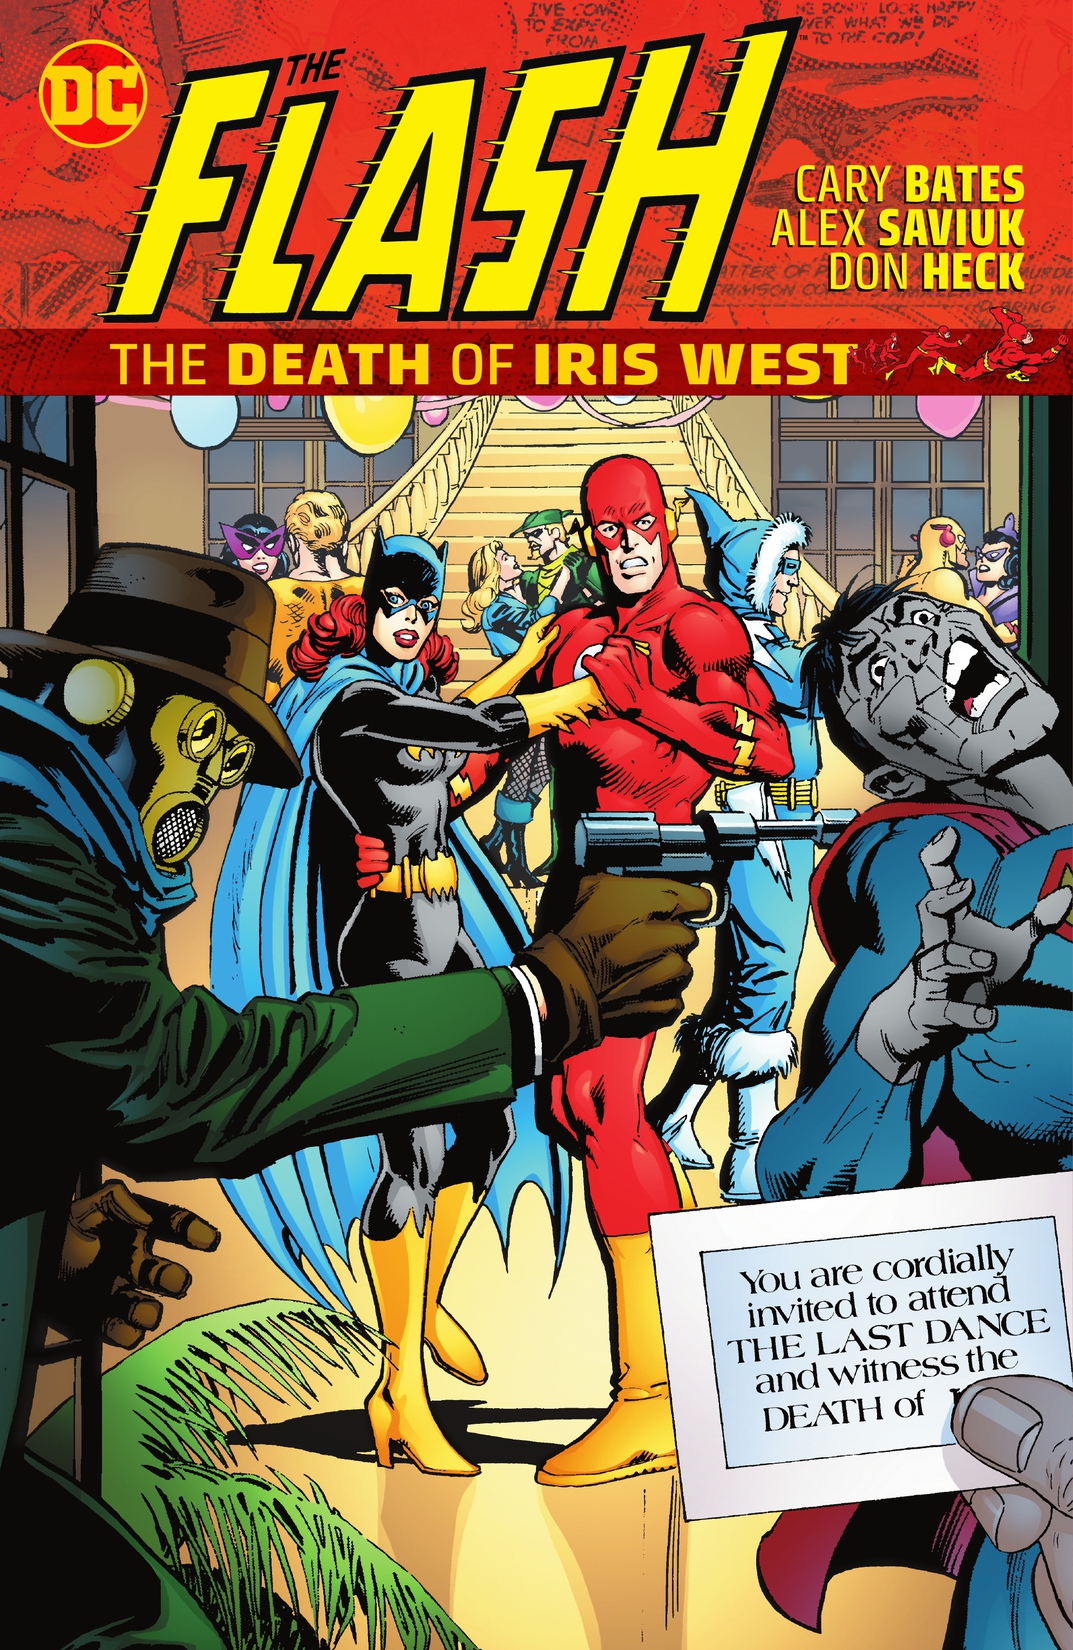 The Flash: The Death of Iris West preview images